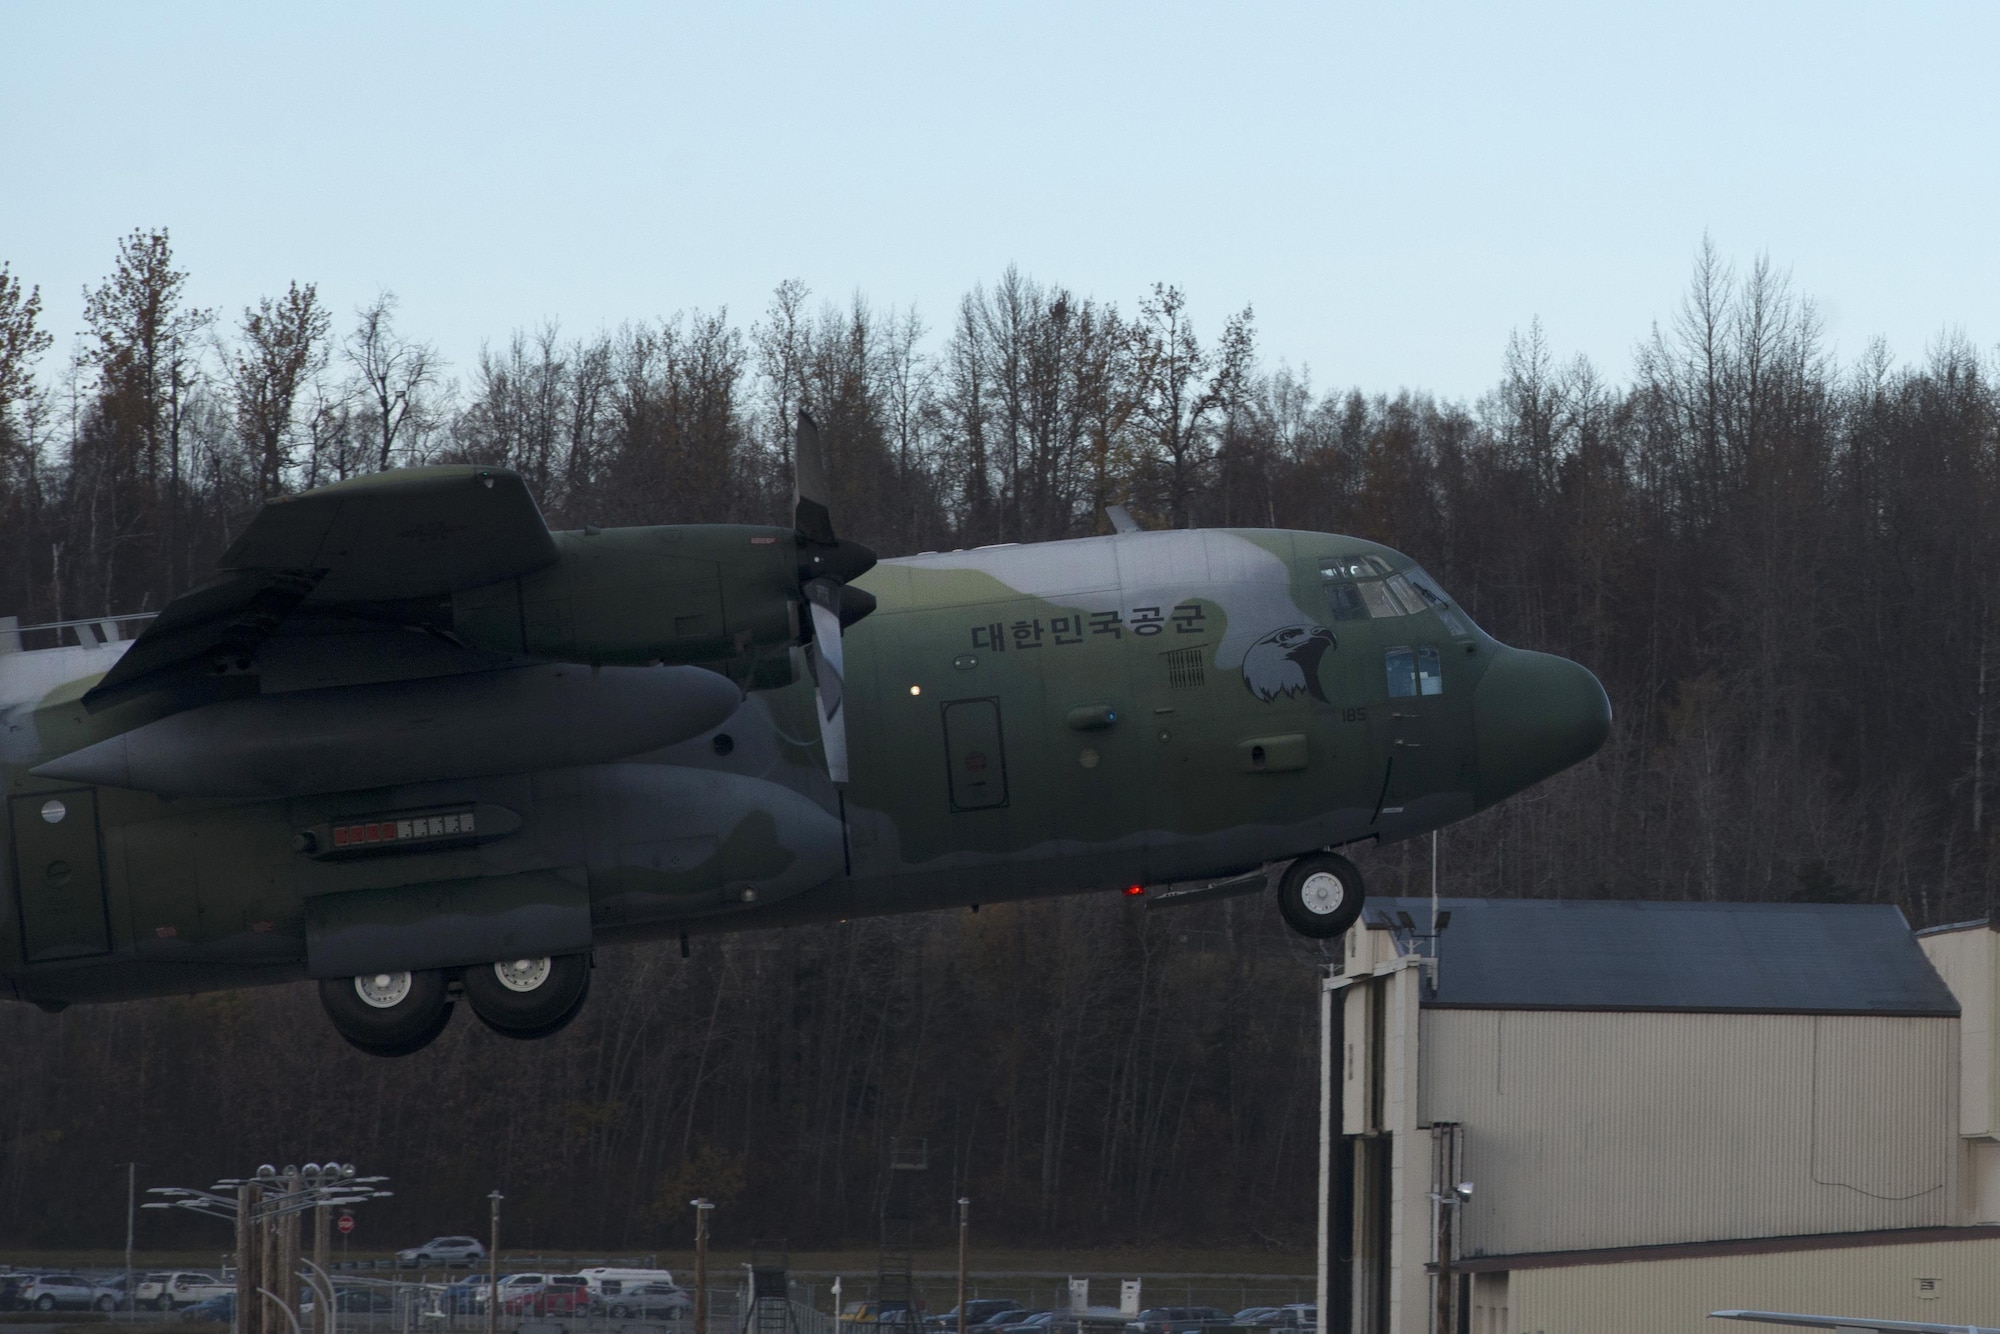 A Republic of Korea Air Force C-130 Hercules departs Joint Base Elmendorf-Richardson during Red Flag - Alaska 17-1 Oct. 12, 2016 RF-A is a joint exercise focused on improving combat readiness of the U.S. military and international forces, which included the ROKAF and Royal New Zealand Air Force this iteration. (U.S. Air Force photo by Airman 1st Class Christopher R. Morales)